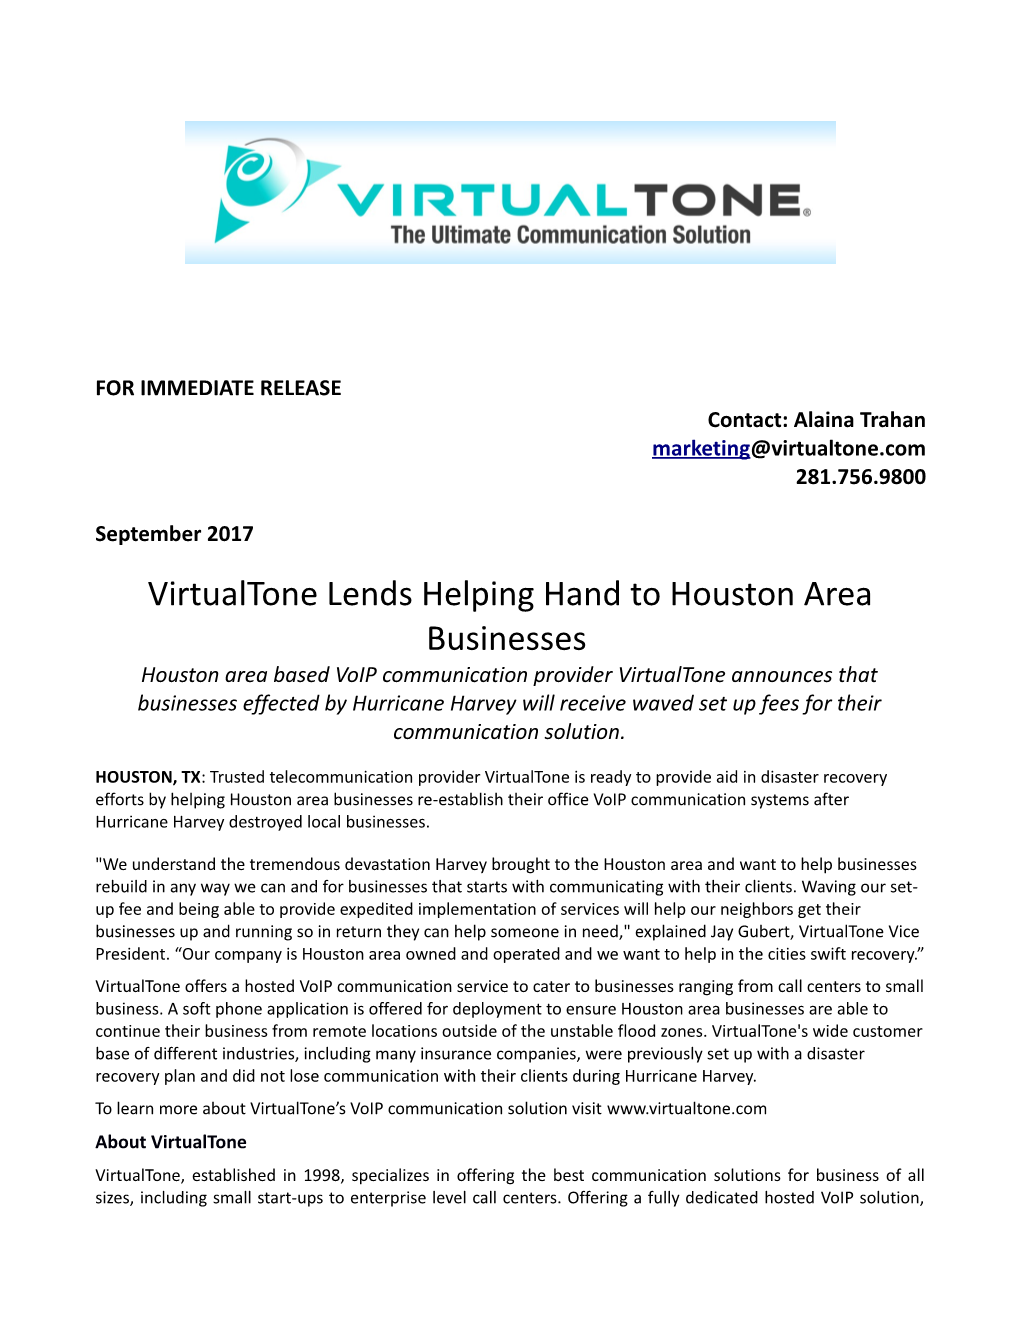 Virtualtone Lends Helping Hand to Houston Area Businesses